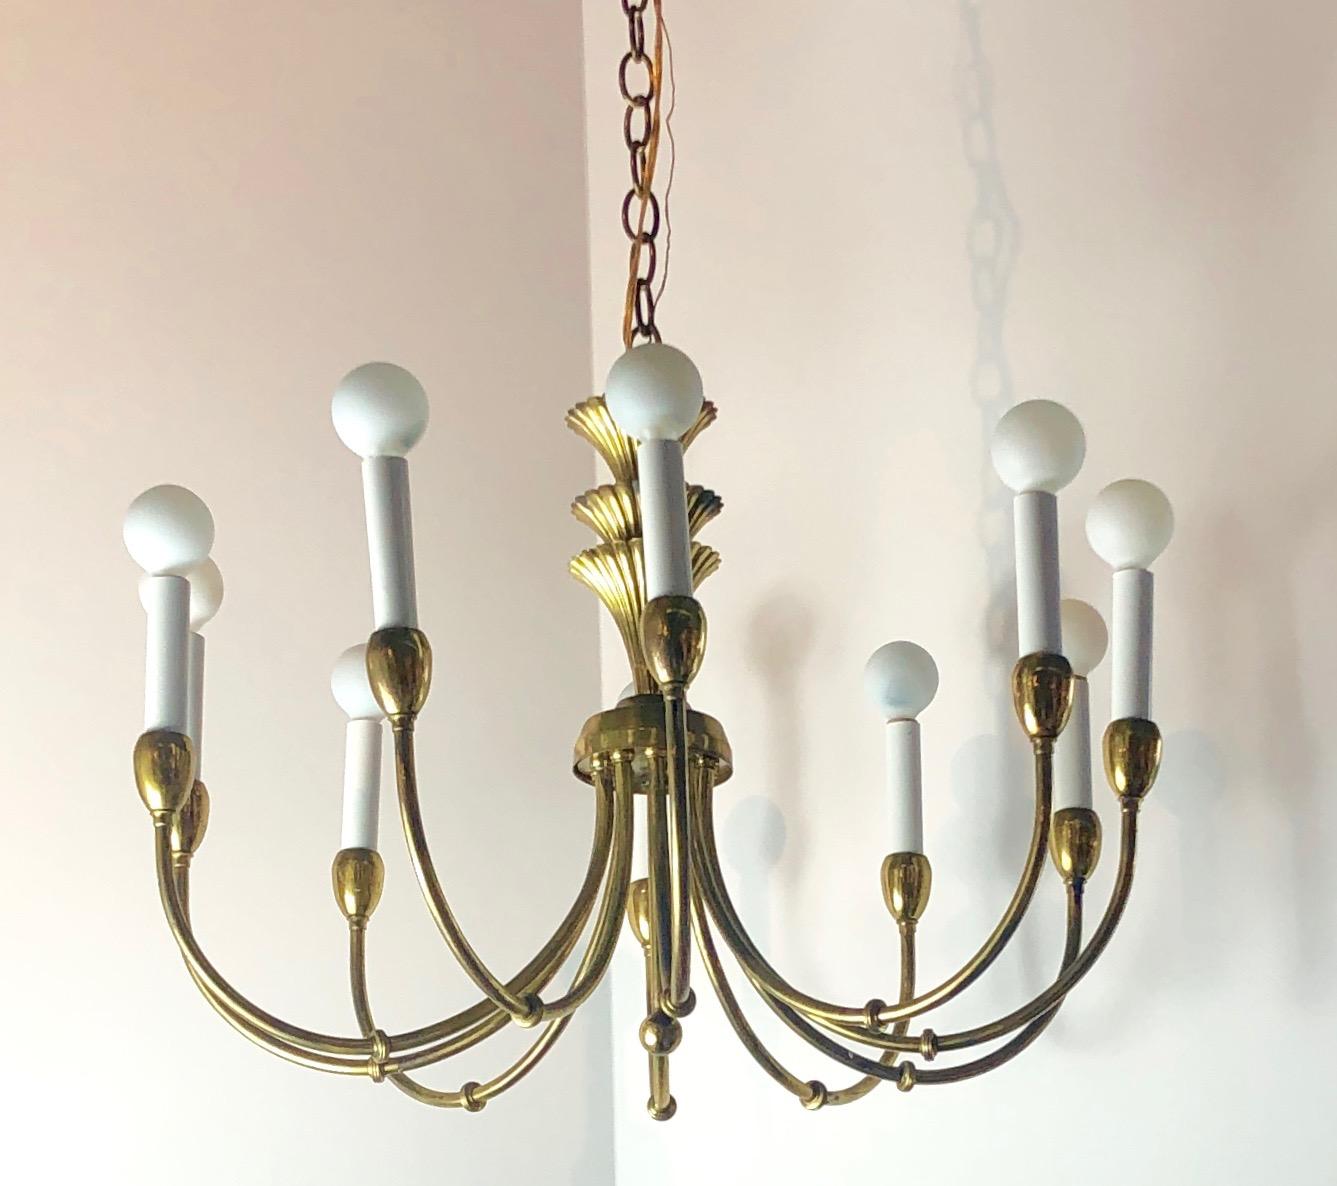 Offered is a Mid-Century Modern Tommi Parzinger style brass Art Deco or Hollywood Regency style chandelier with ten sculptural arms and ten torchères. The attention to elegant, yet clean and Classic design makes this chandelier so desirable some